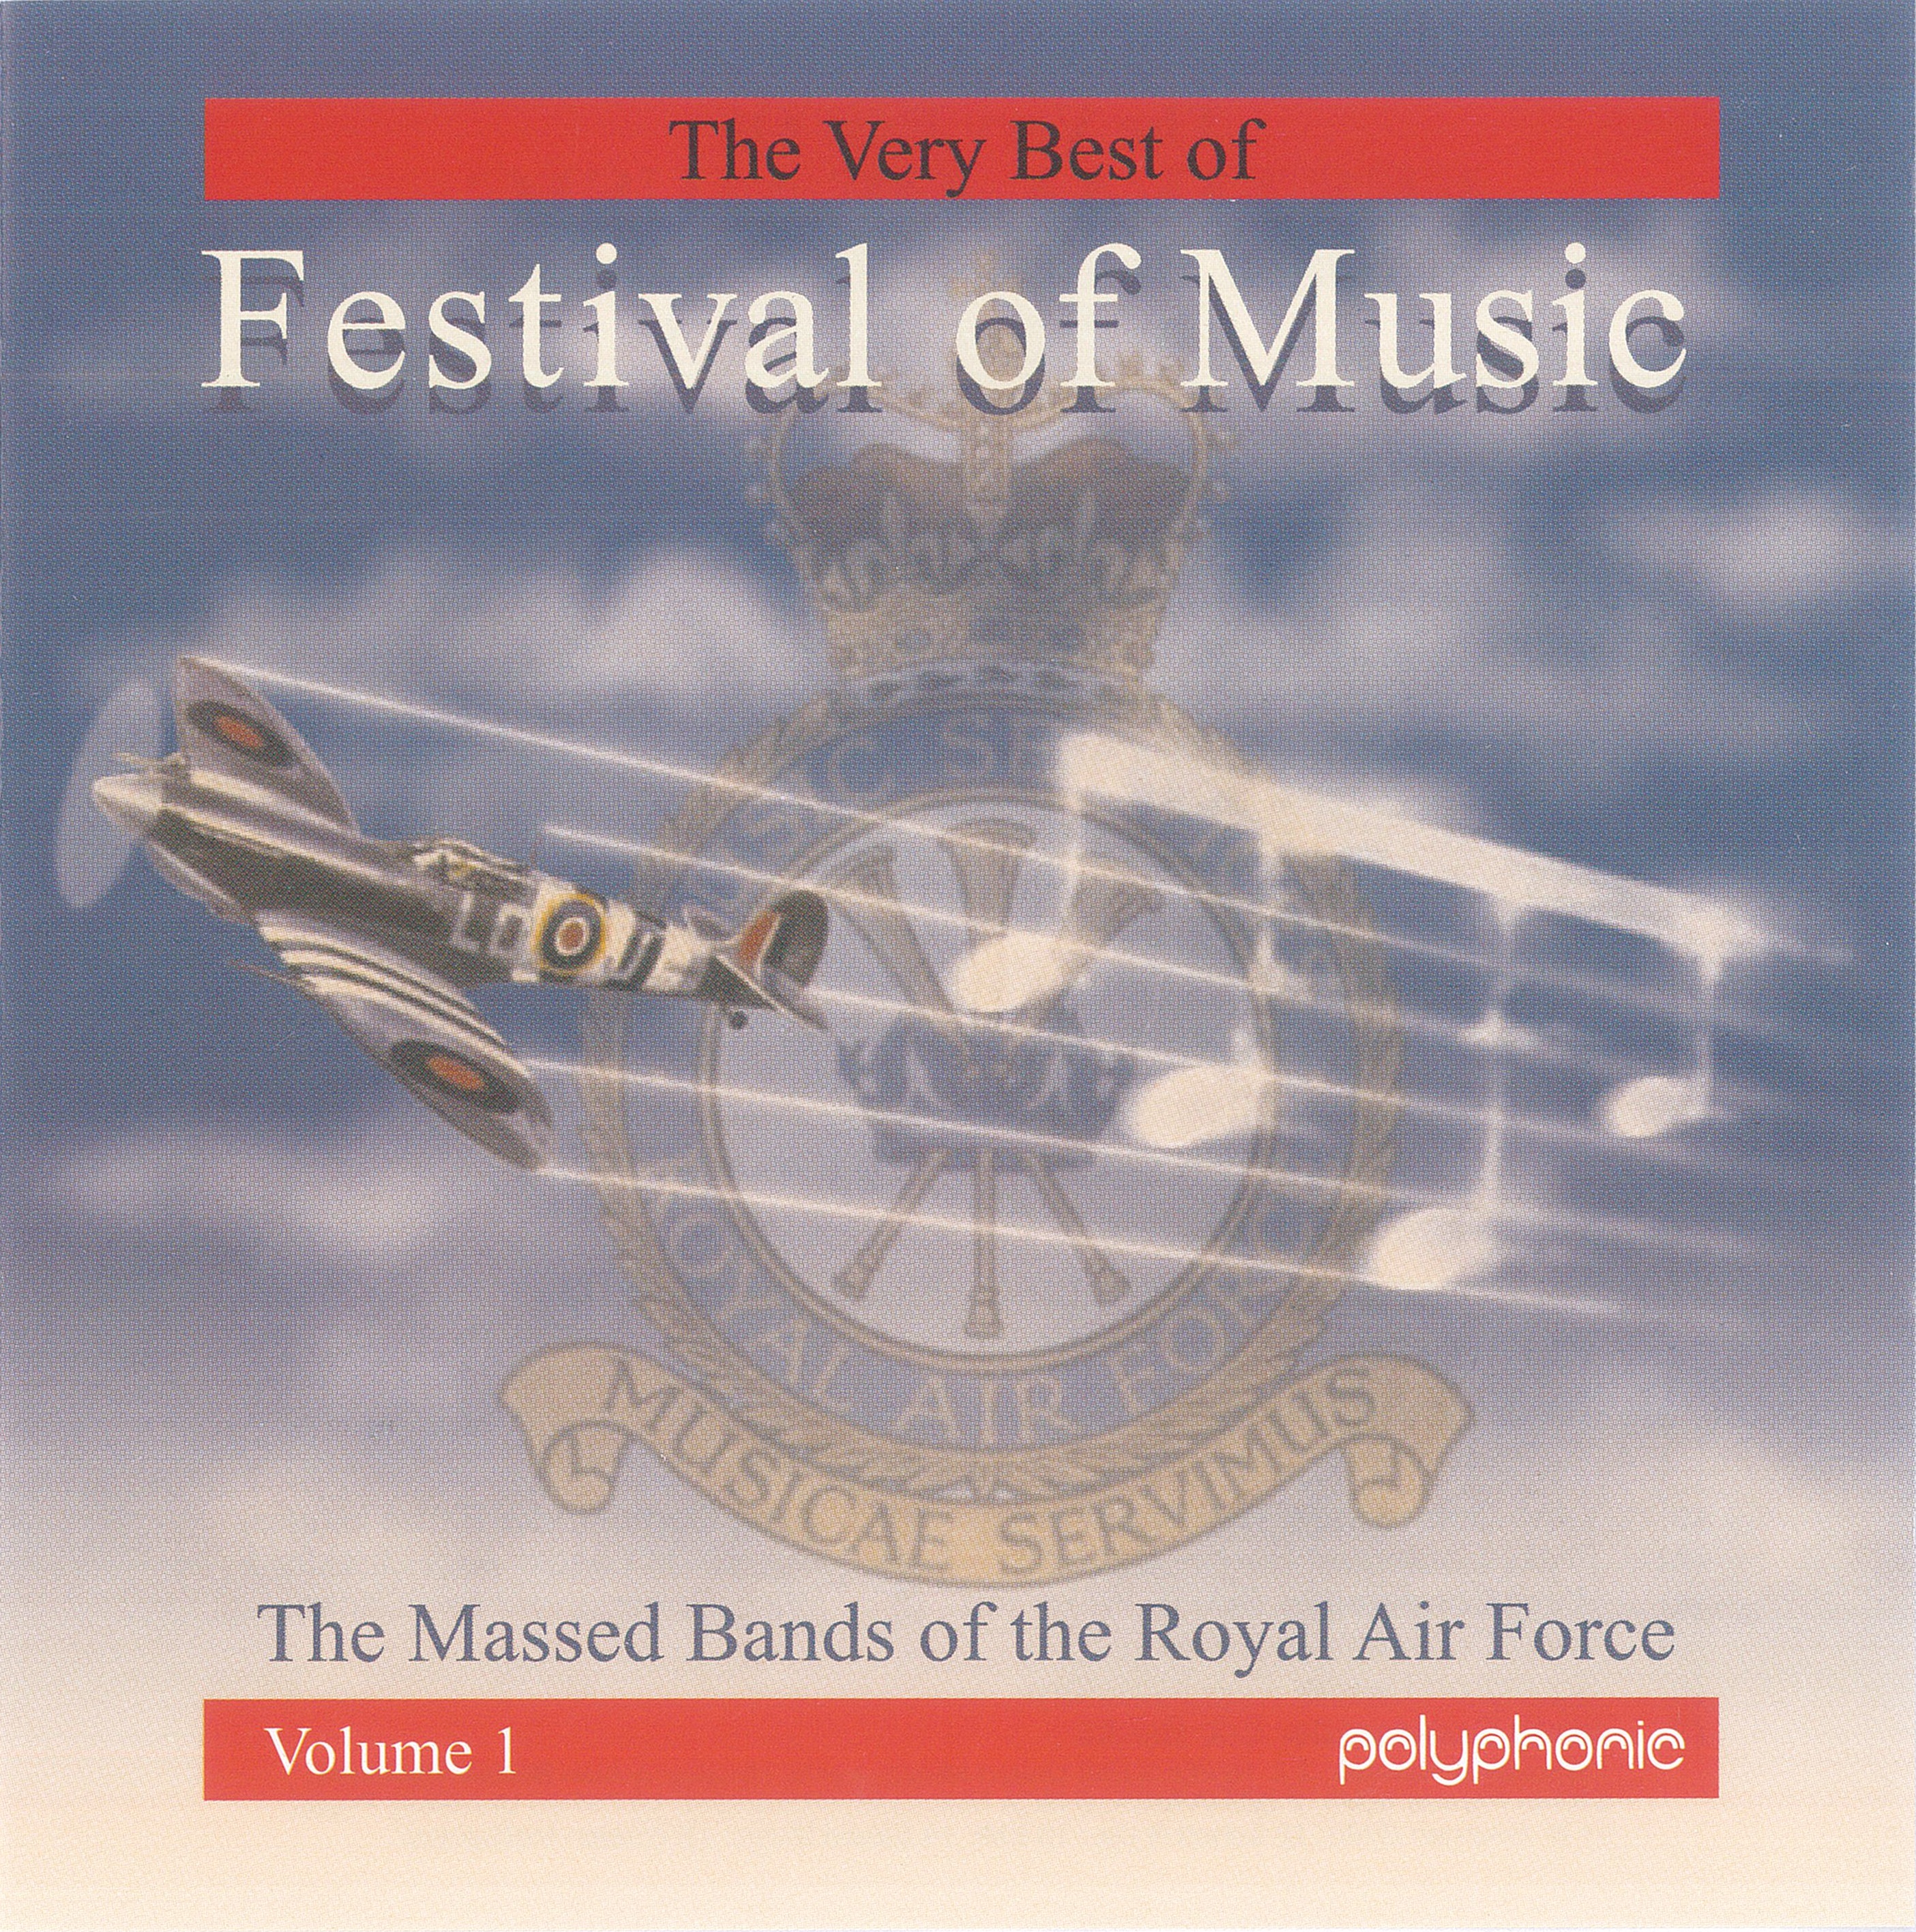 The Very Best of Festival of Music Vol. 1 - CD